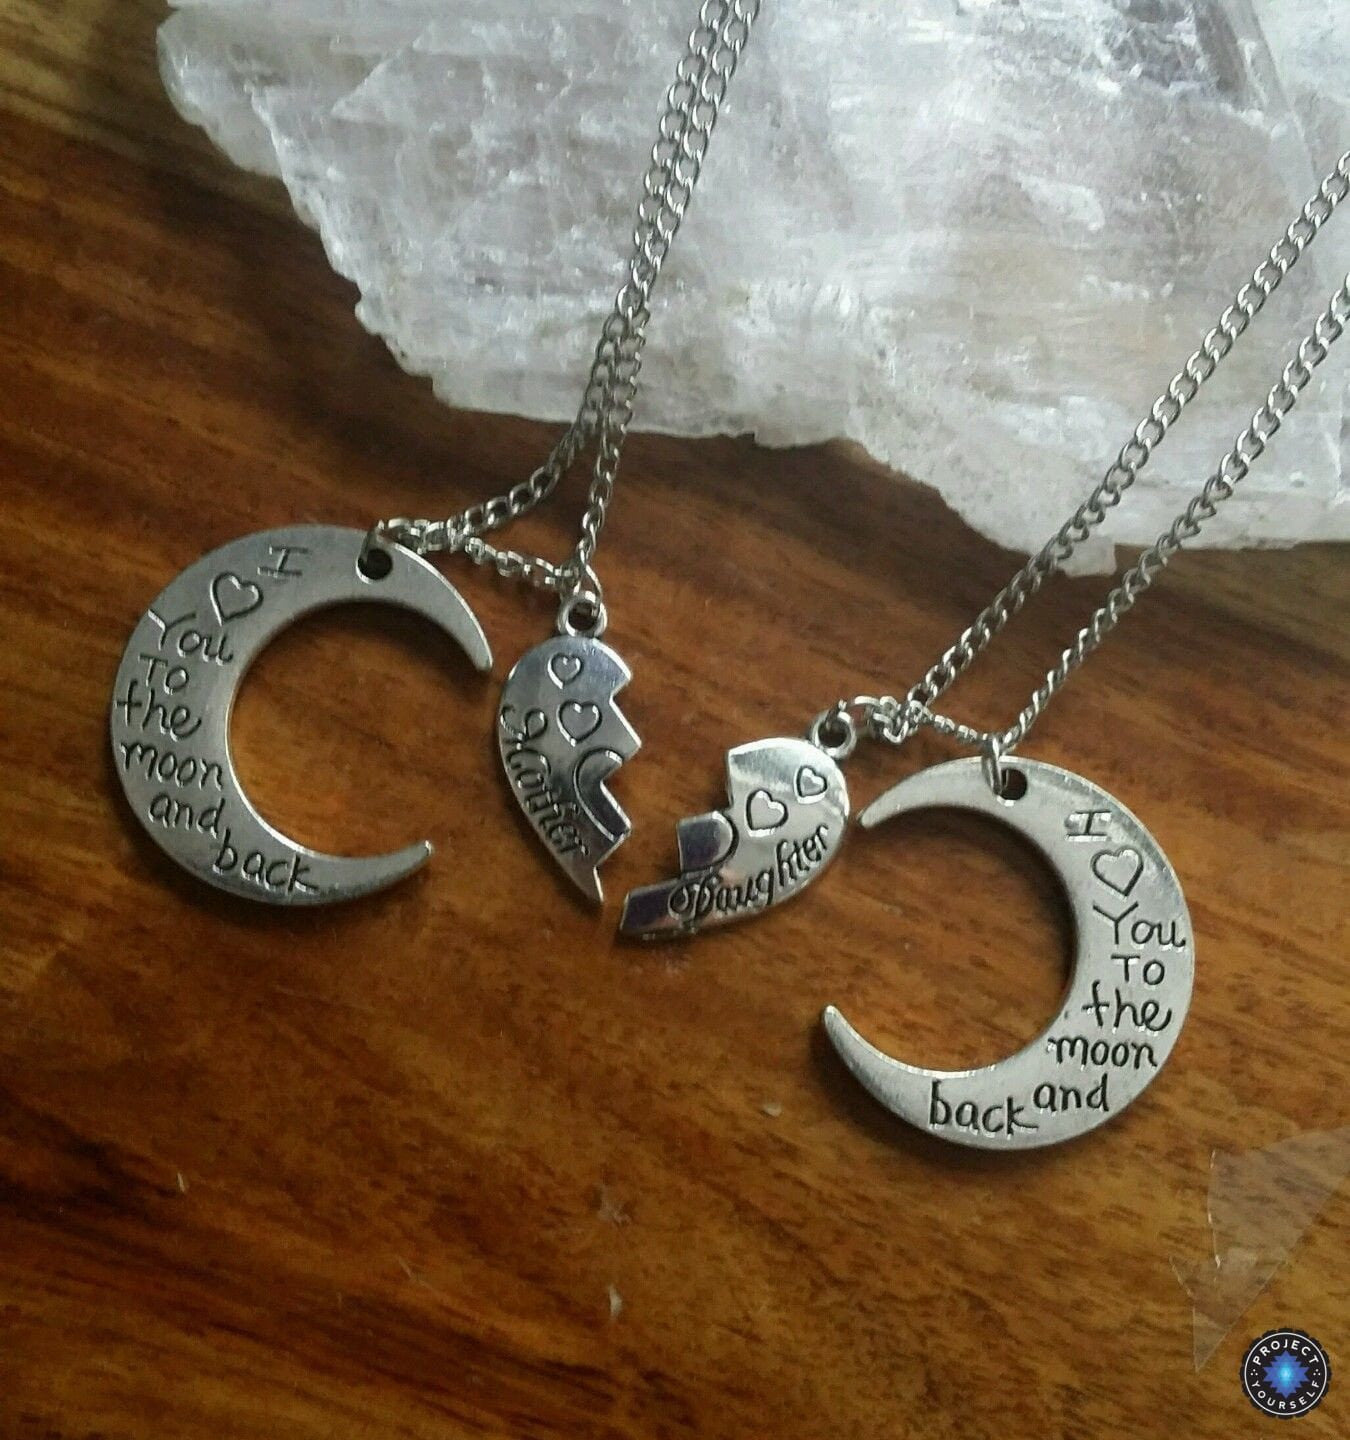 Two-Part Heart "I Love You To The Moon And Back" Crescent Moon Mother-Daughter Pendant Necklace Set Necklace